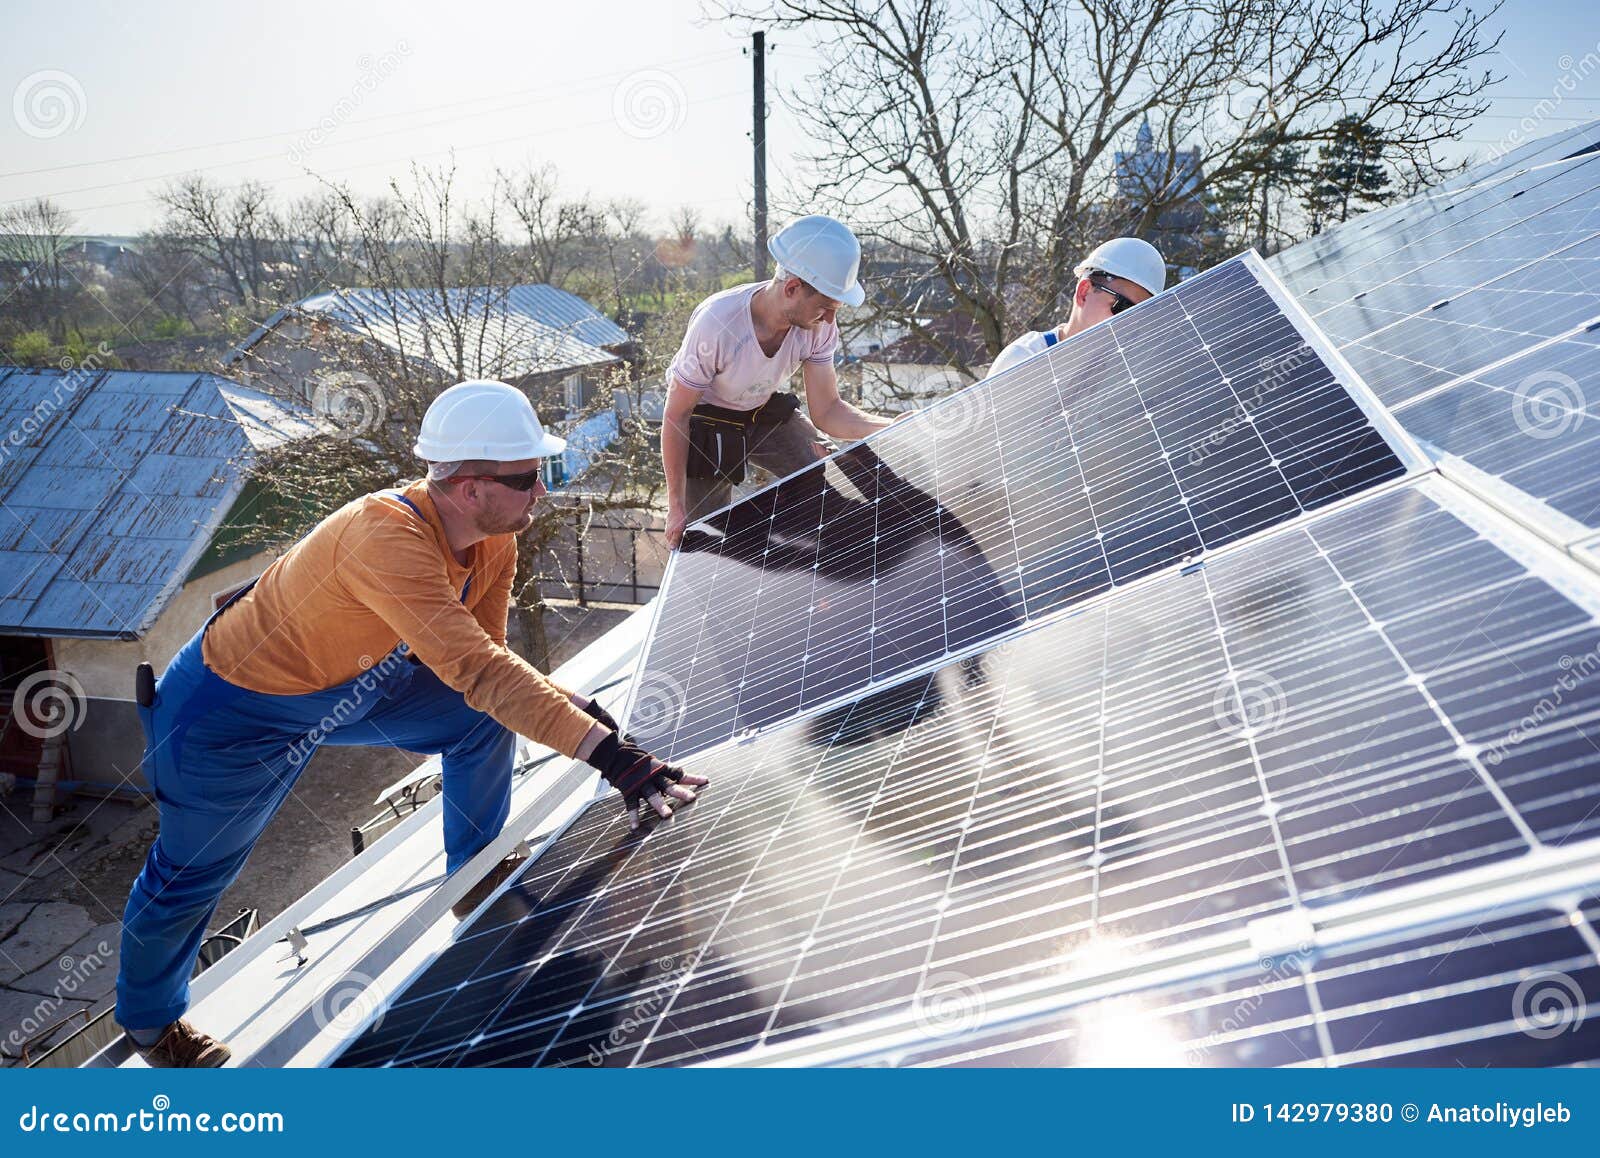 Installing Solar Photovoltaic Panel System On Roof Of House Stock Photo Image of installer